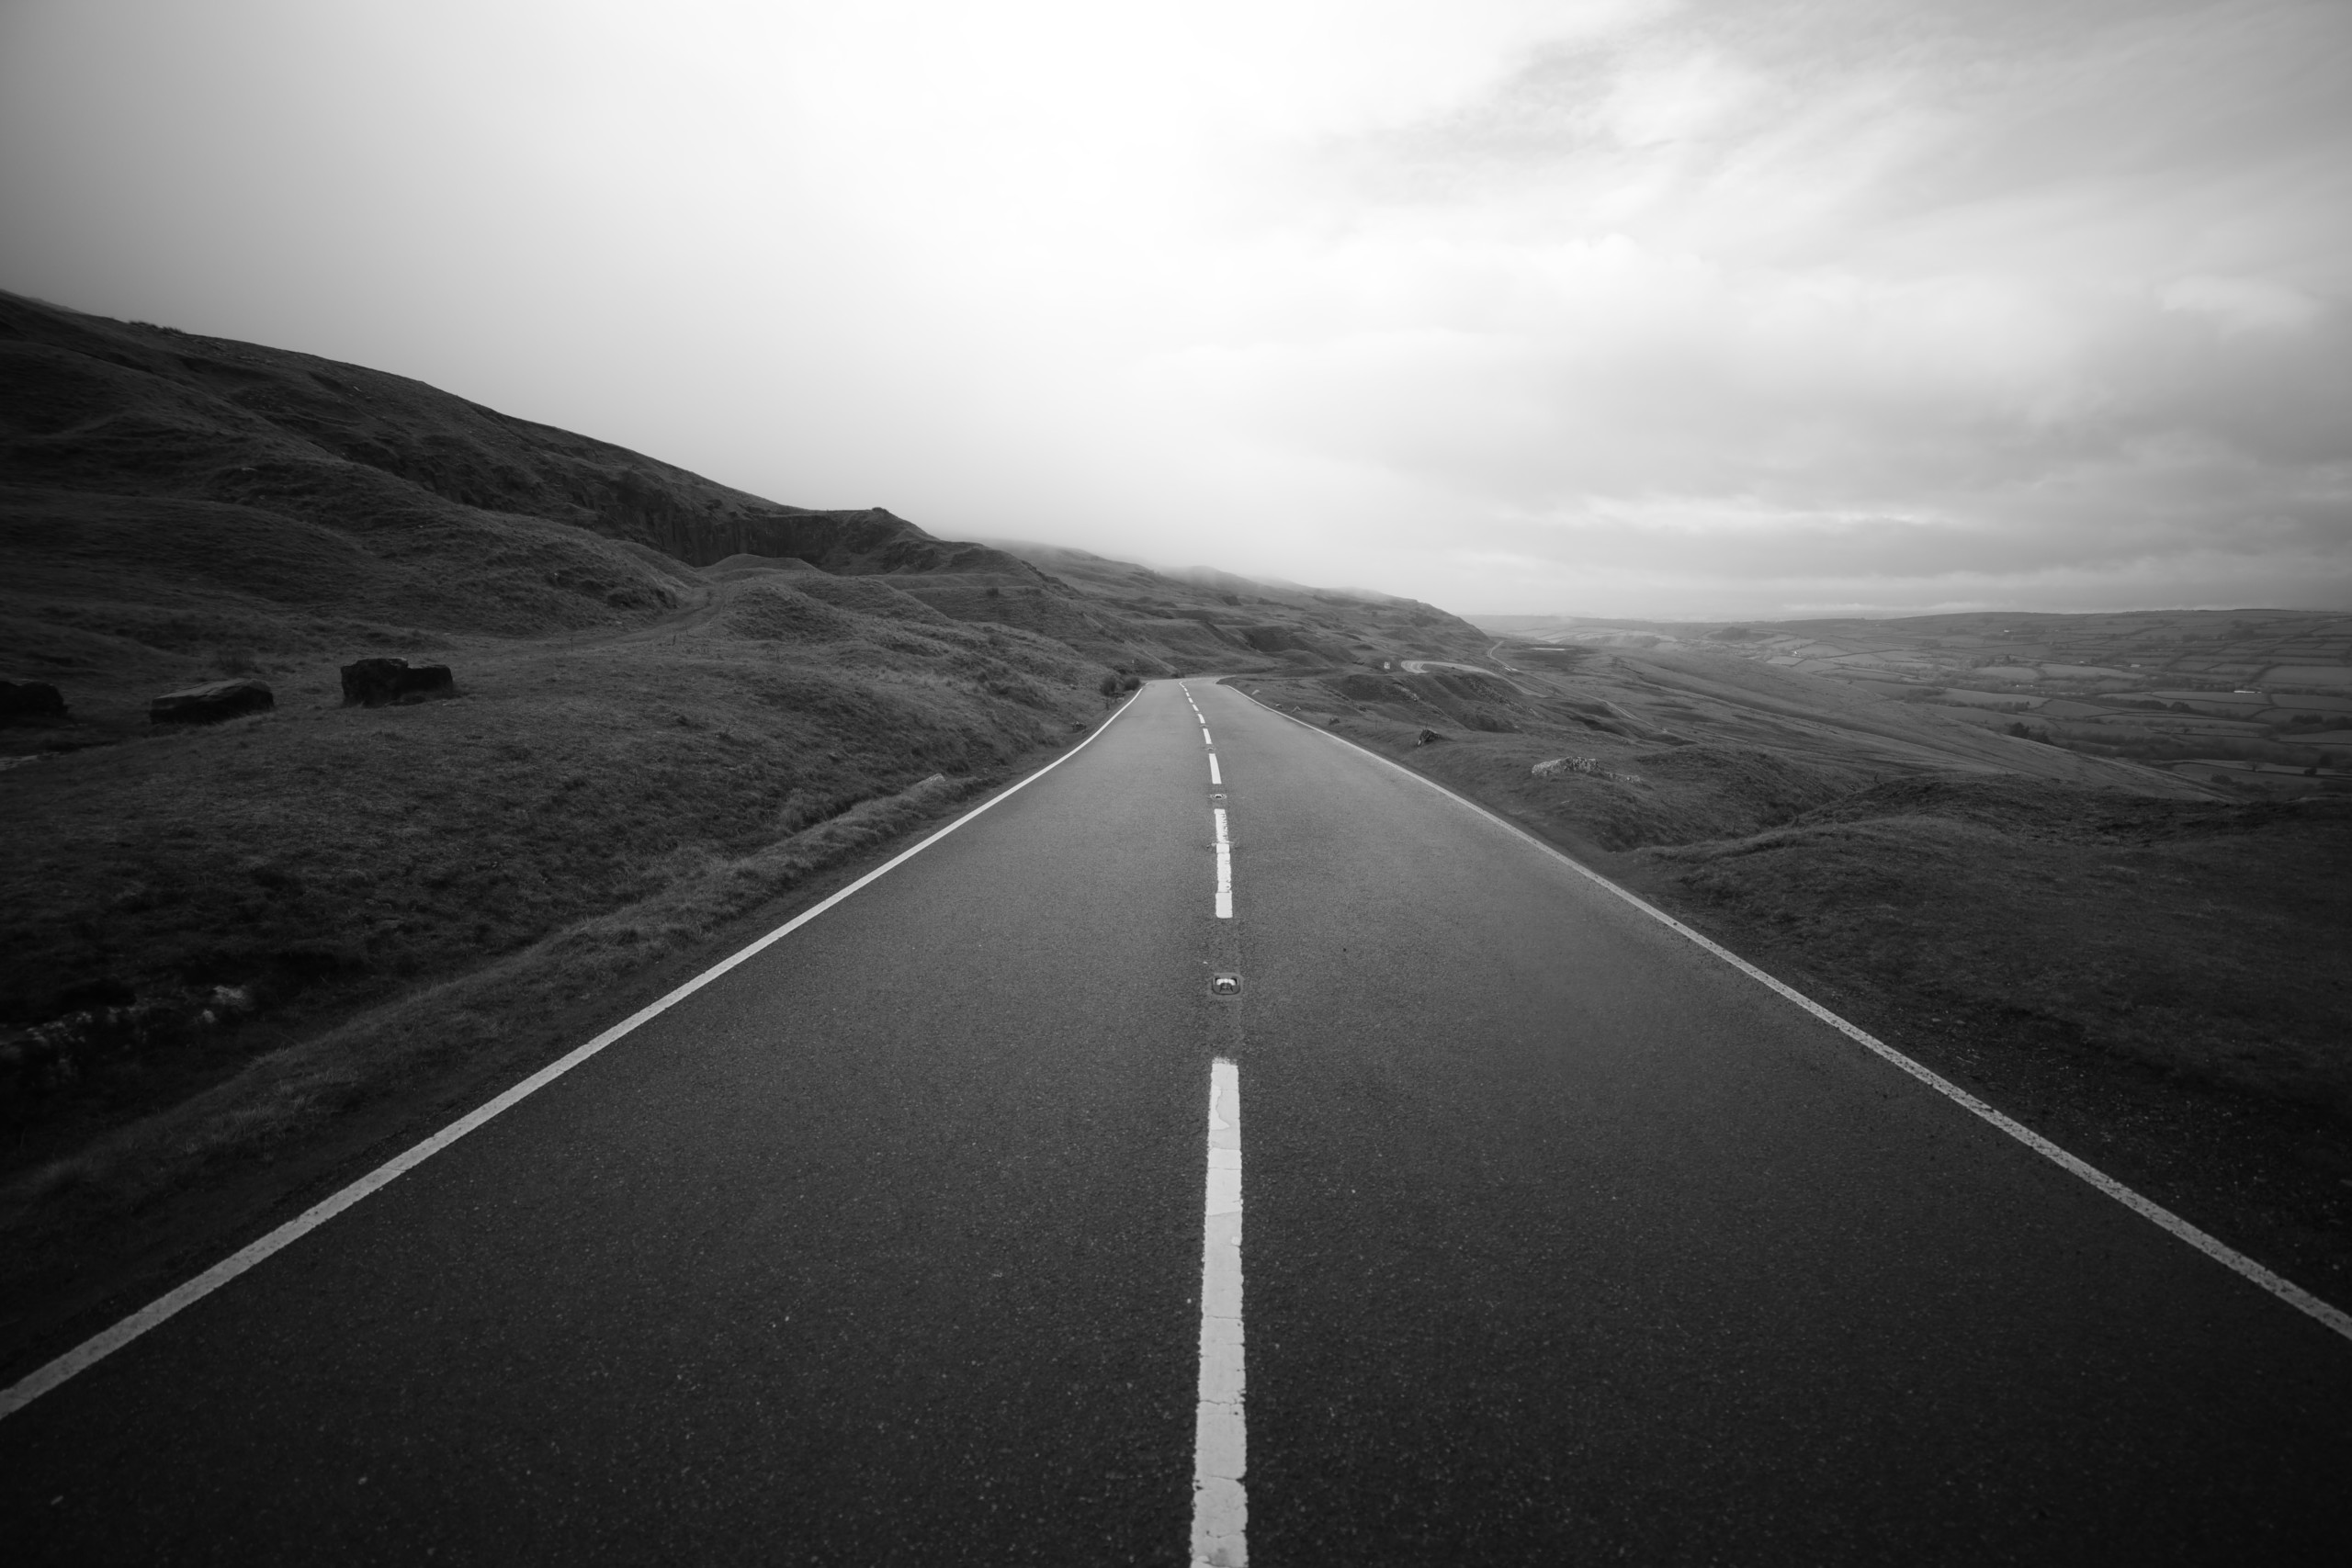 A great monochrome image of a long road